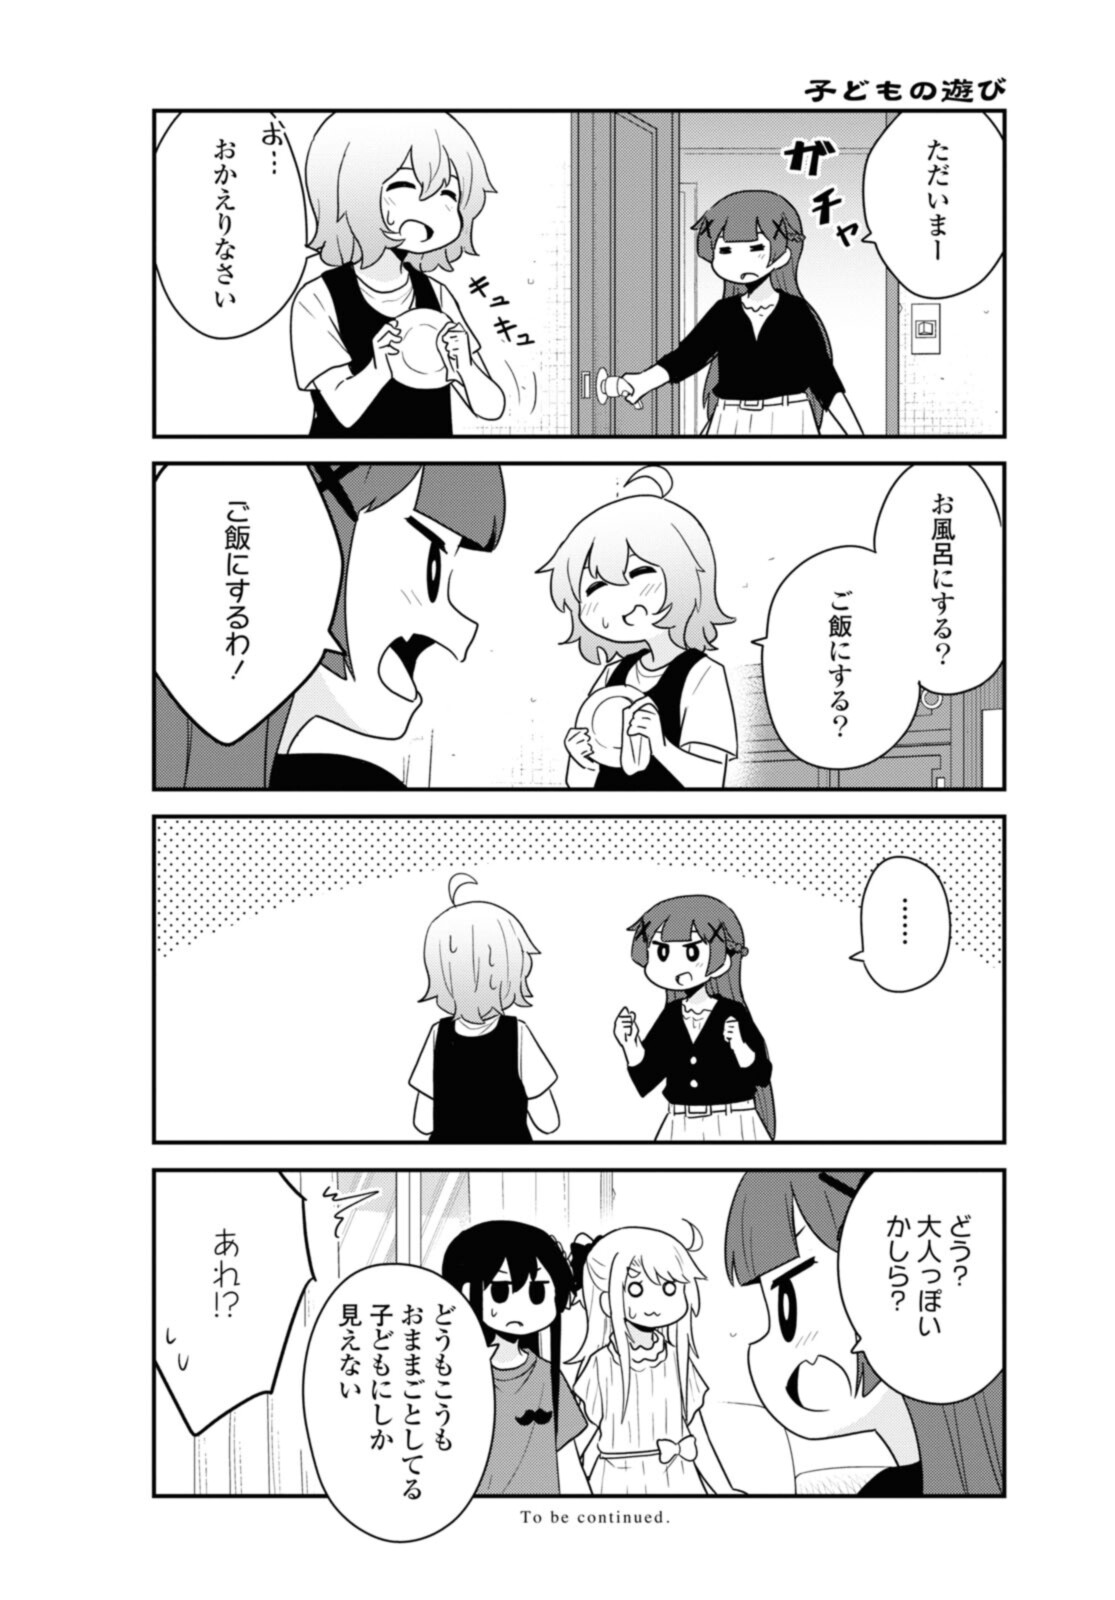 Wataten! An Angel Flew Down to Me 私に天使が舞い降りた！ 第91話 - Page 16